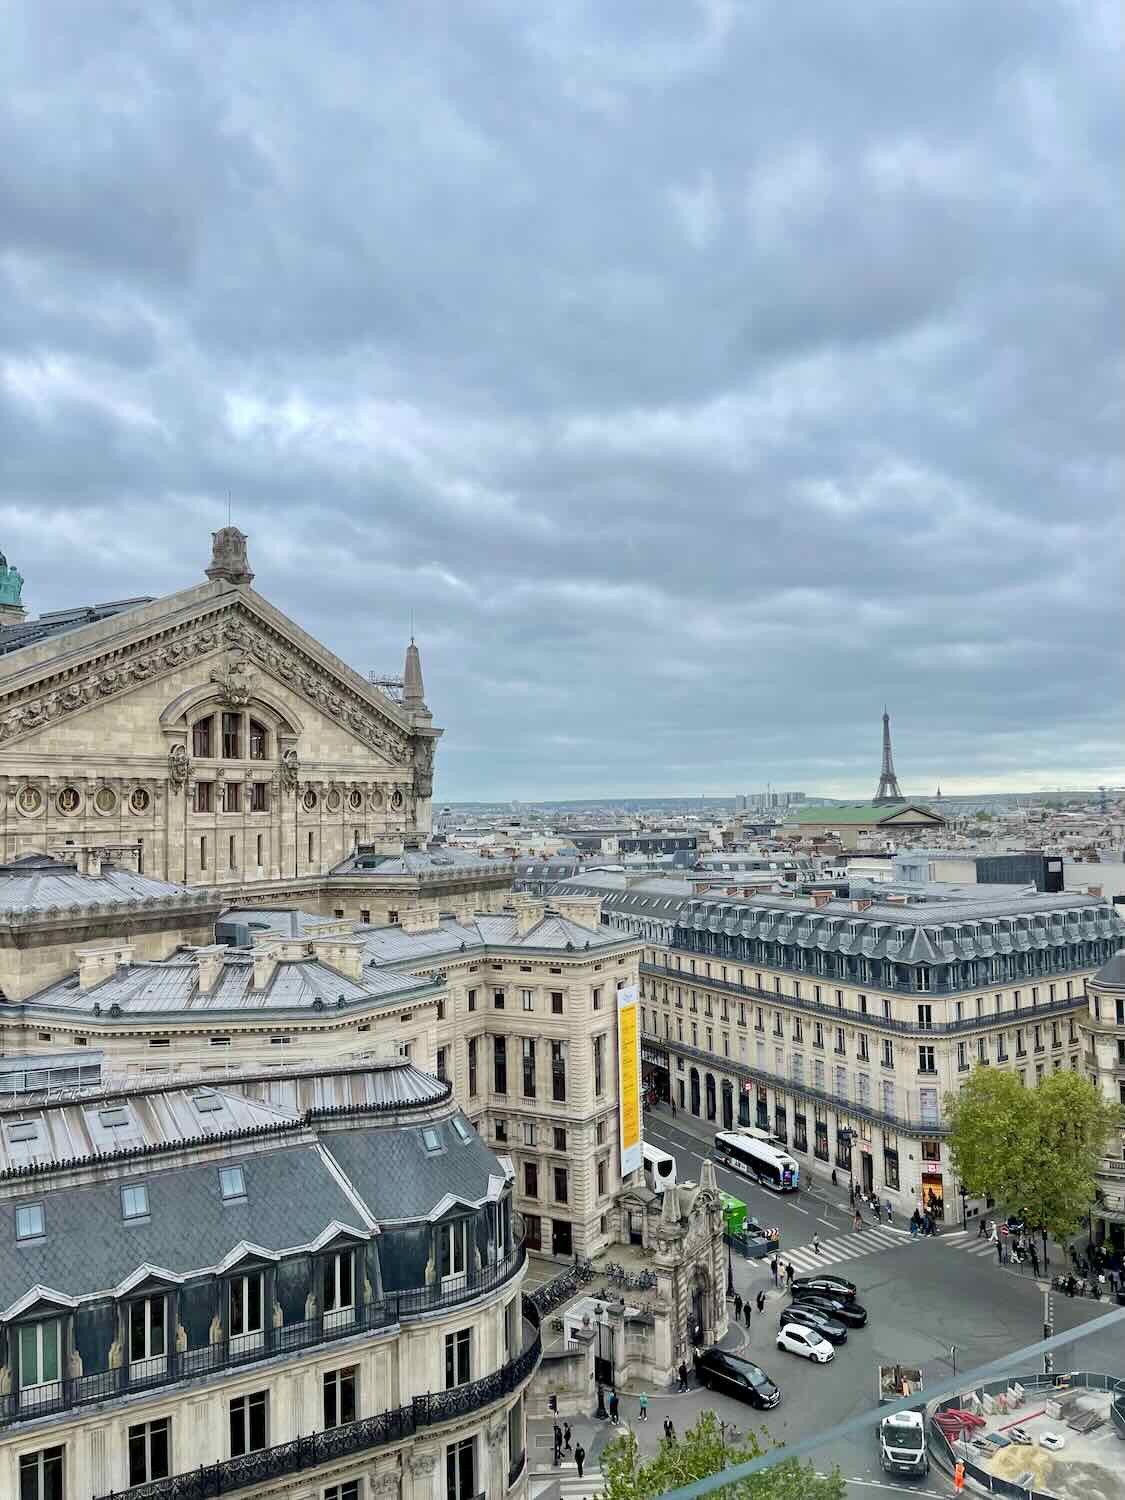 A sweeping view from a rooftop in Paris, overlooking iconic cityscape elements including grand buildings and distant views of the Eiffel Tower, set against a dramatic cloudy sky. The scene captures the vast, dynamic architecture of Paris from an elevated perspective.